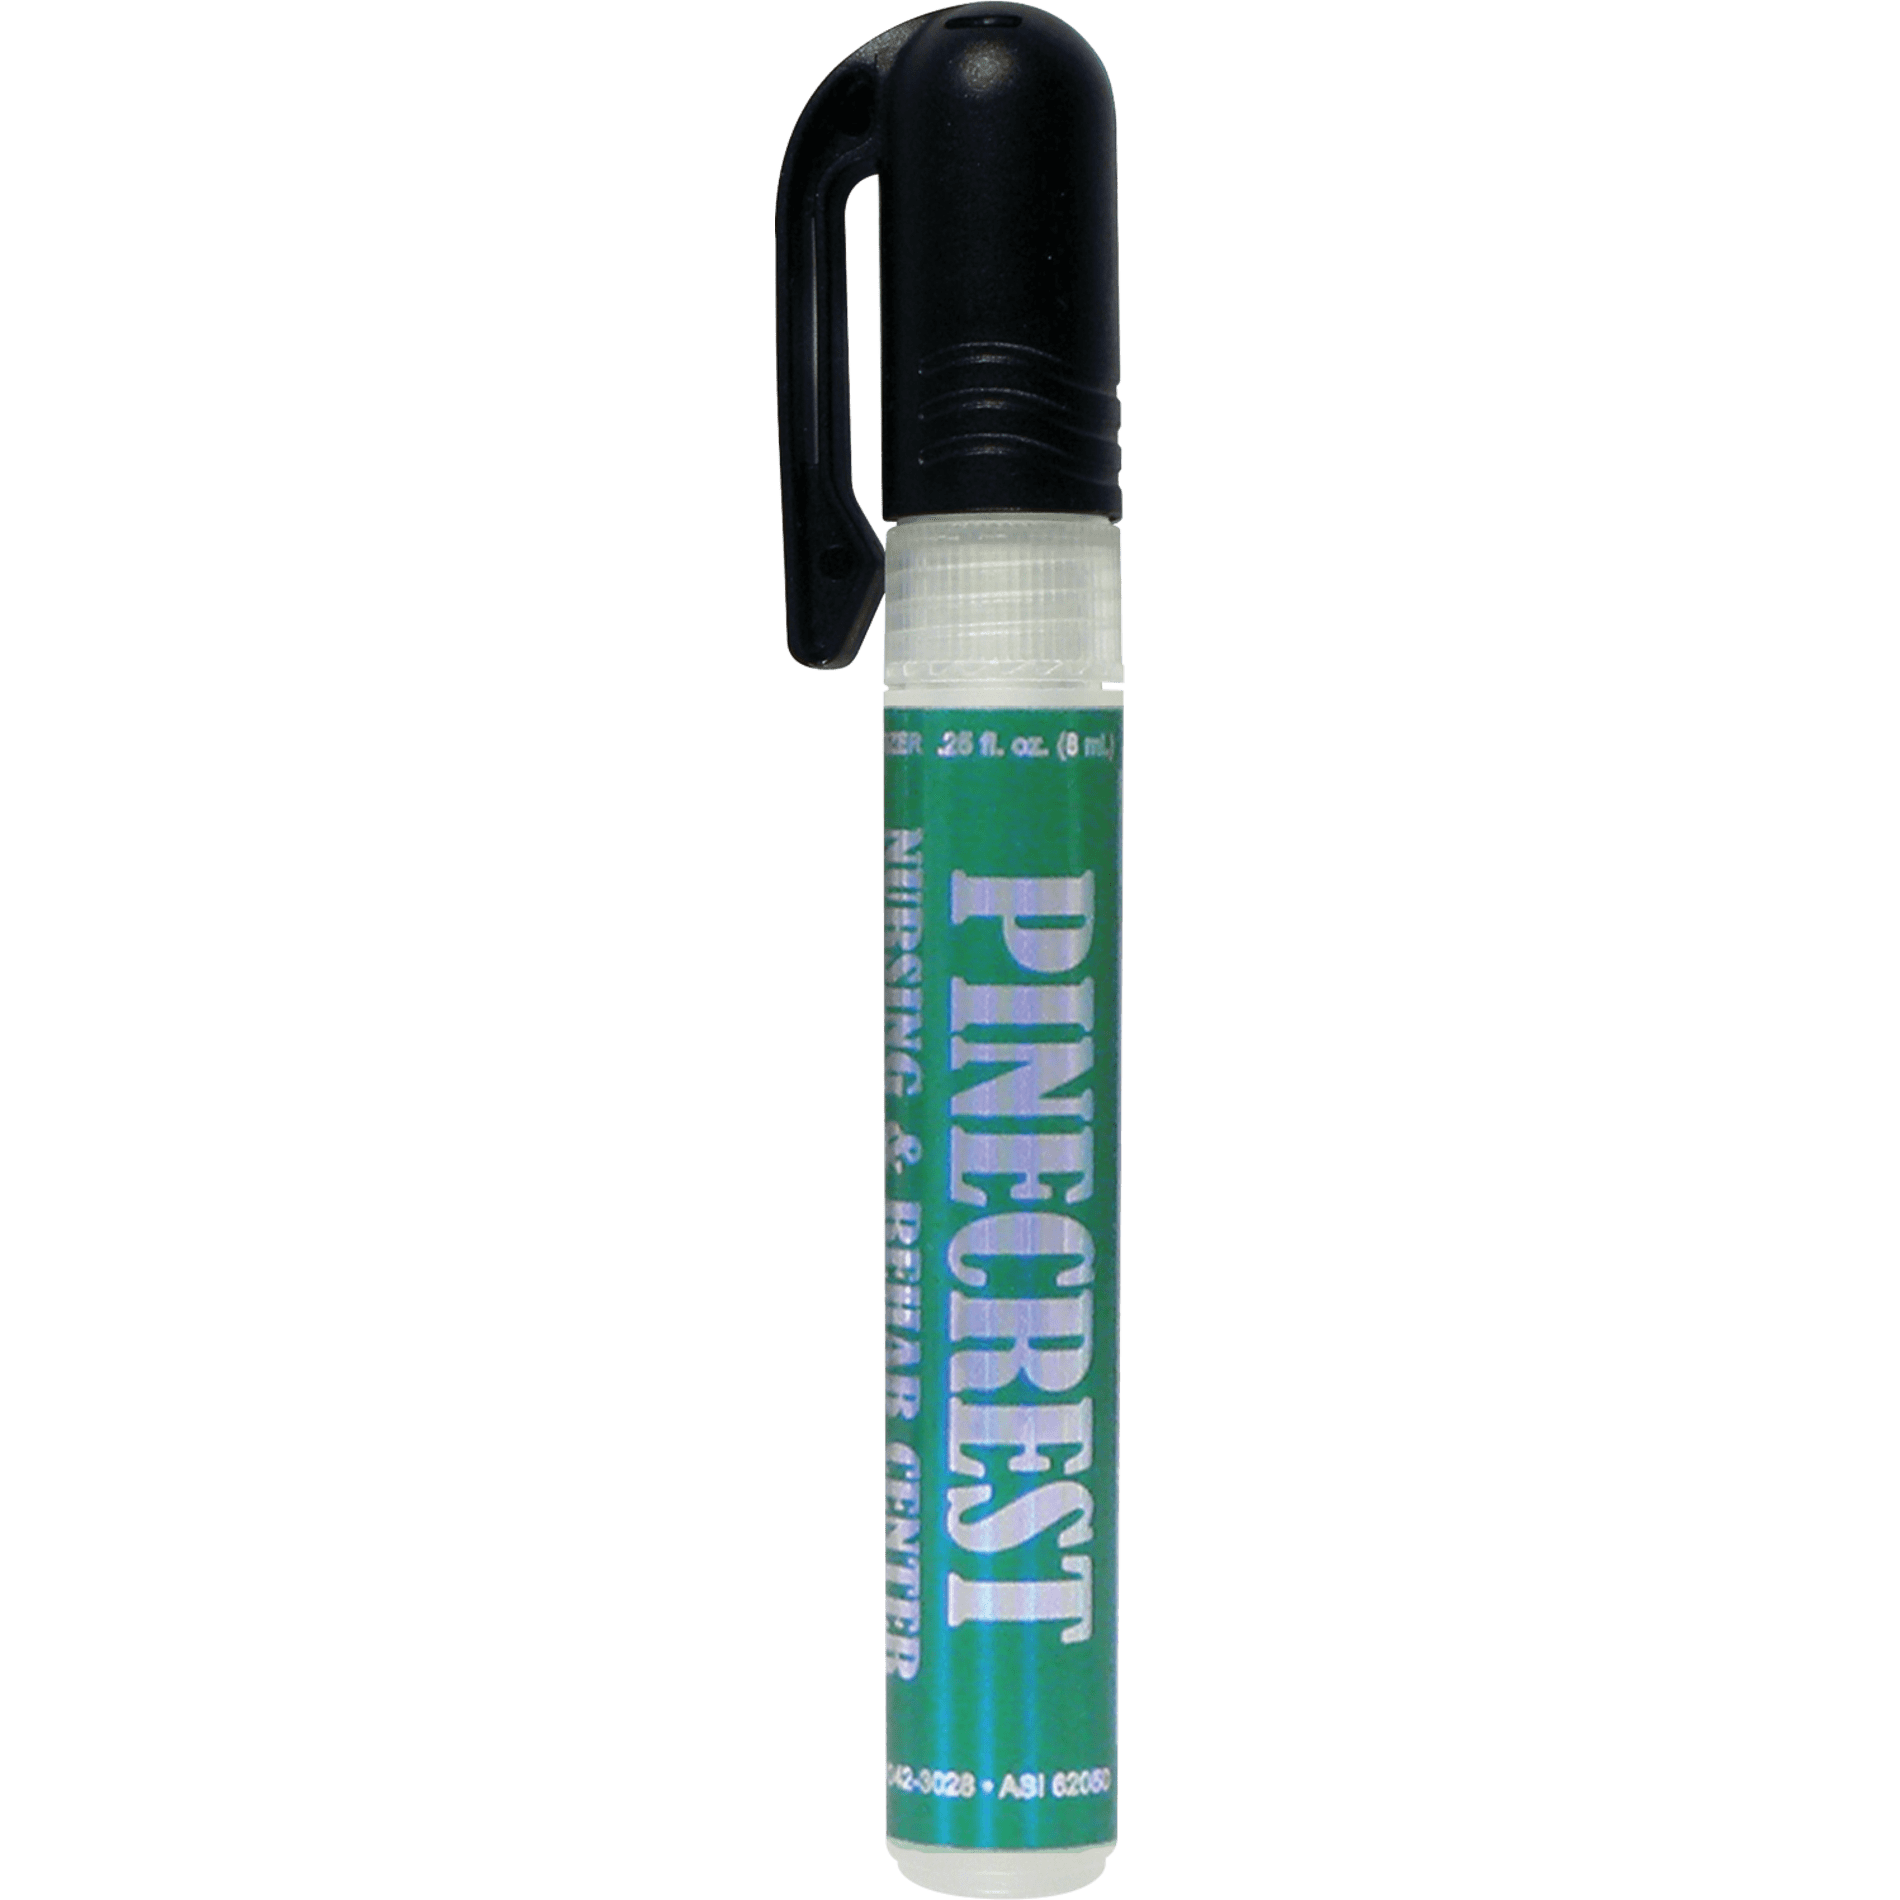 The 0.25oz (7.4ml) Hand Sanitizer Pen Sprayer by HumphreyLine is a pocket-sized spray sanitizer engineered using 80% alcohol. Item features a scratch-resistant, waterproof Tuf Gloss™ label that can be customized with a four-color process imprint. Choose from Clear, White or Holographic label. Holographic labels are available with single stock color imprint only. Meets FDA requirements. Not available for export.